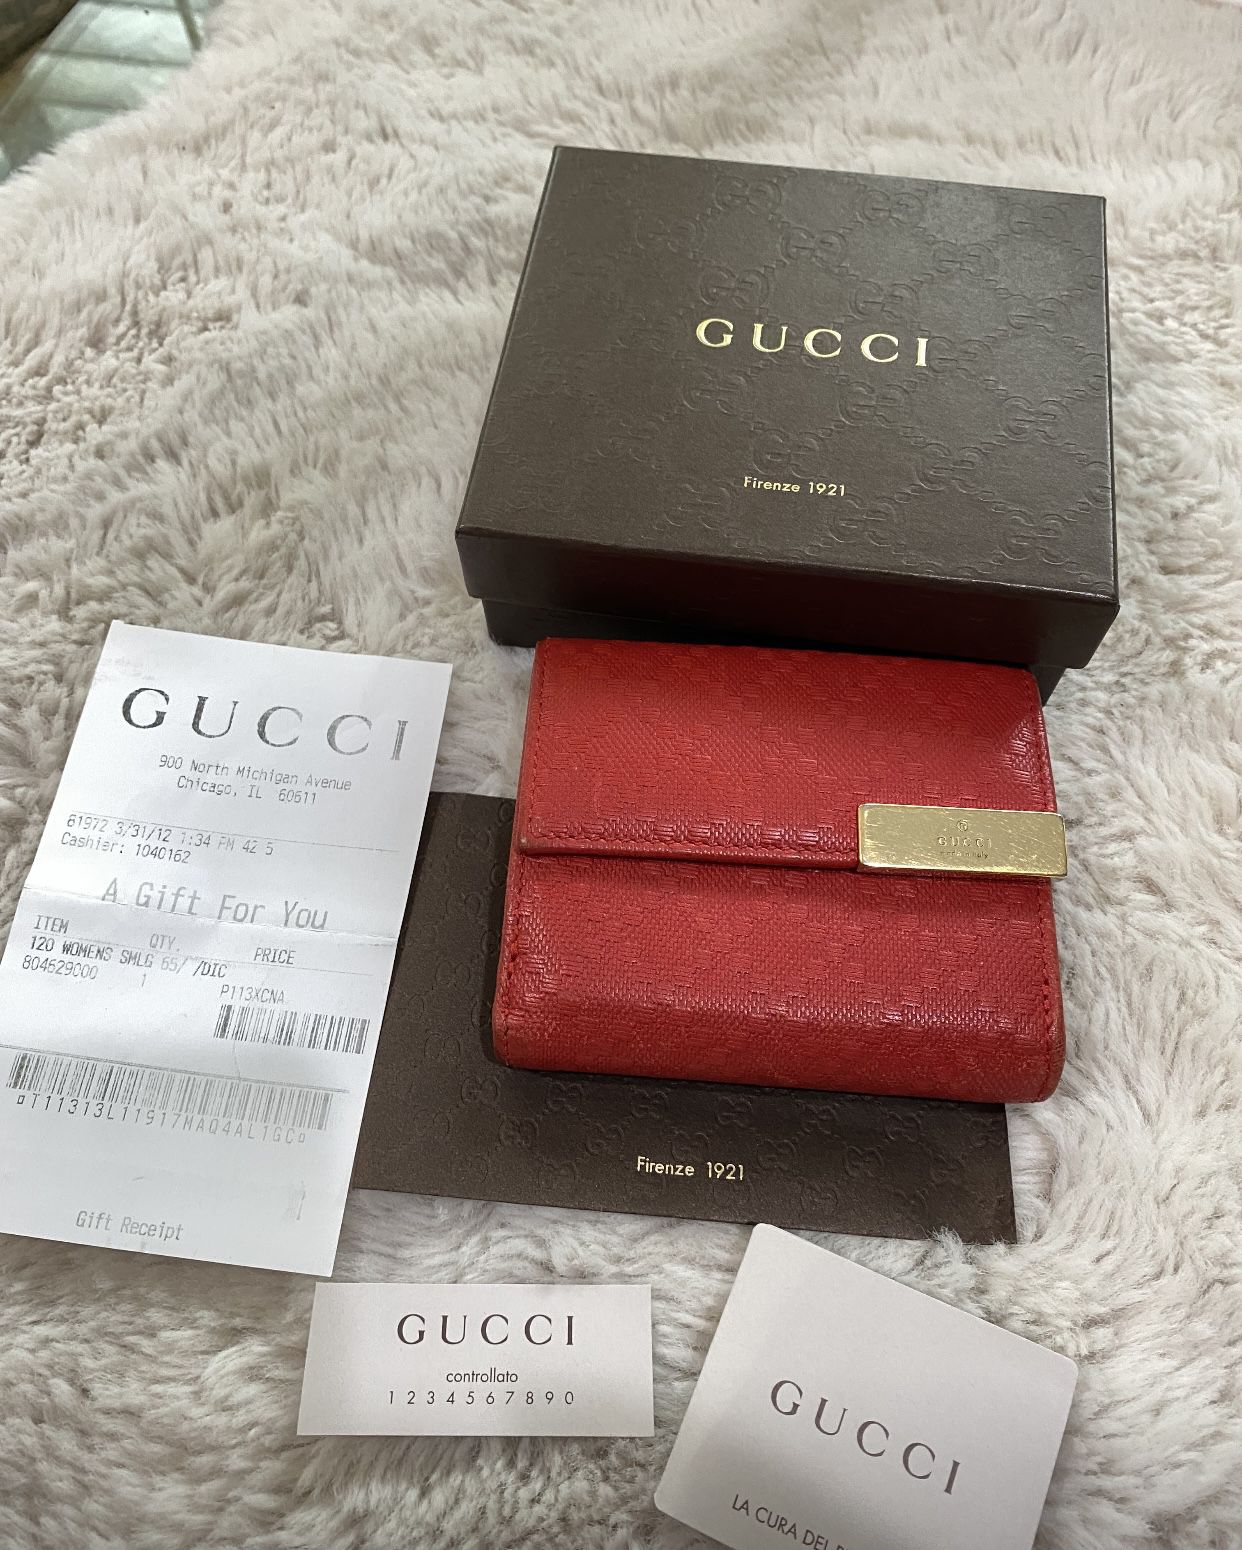 Used Authentic Gucci Wallet